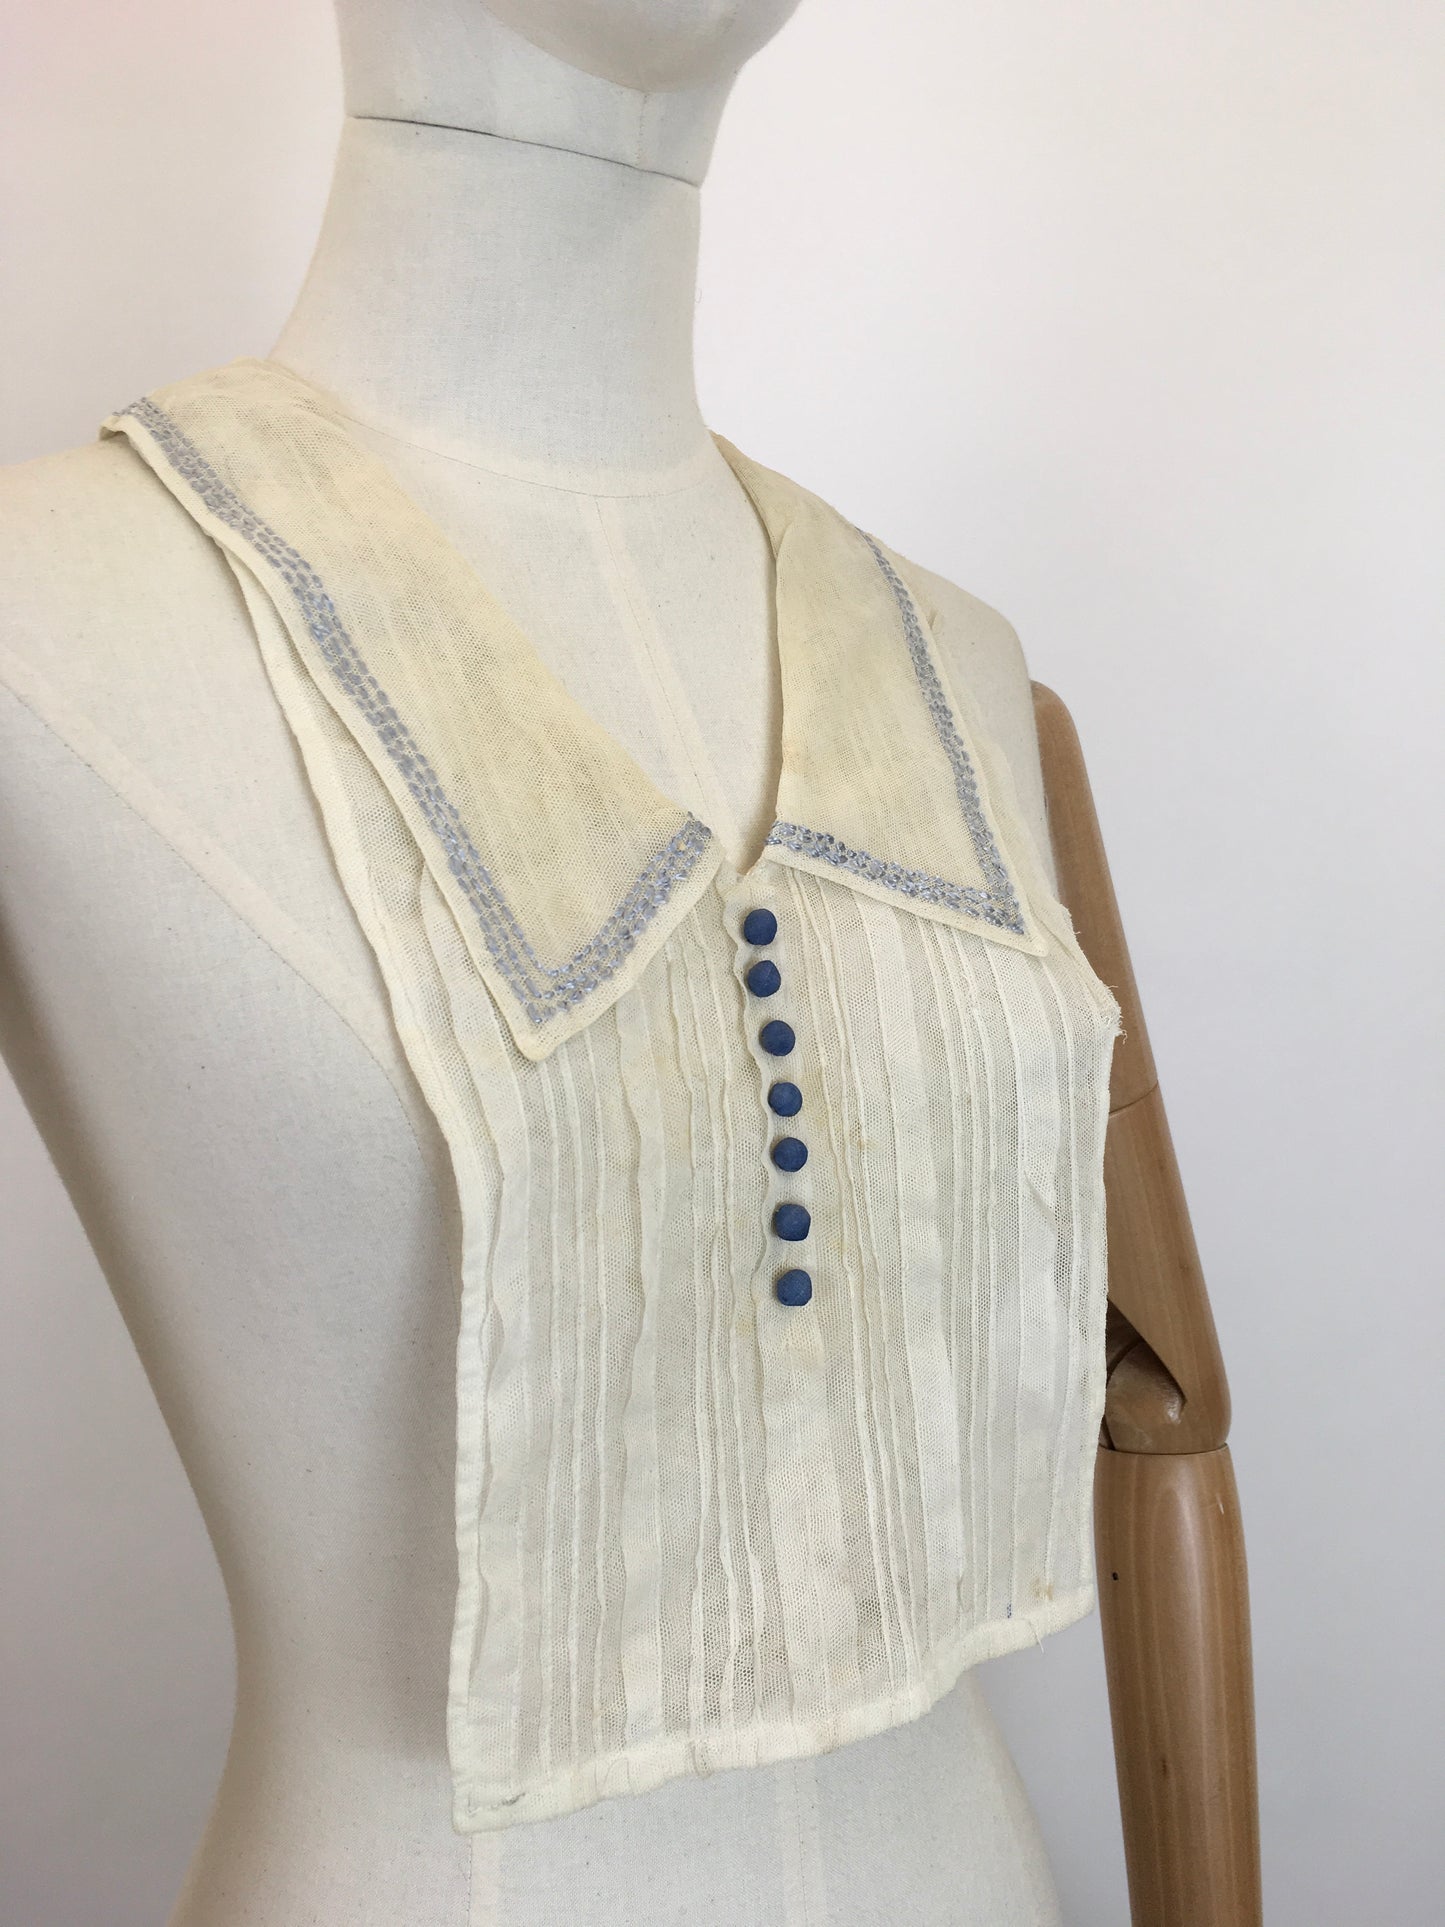 Original 1910/ 1920's Stunning Fine Collar / With Front Panel and Exquisite Embroidery